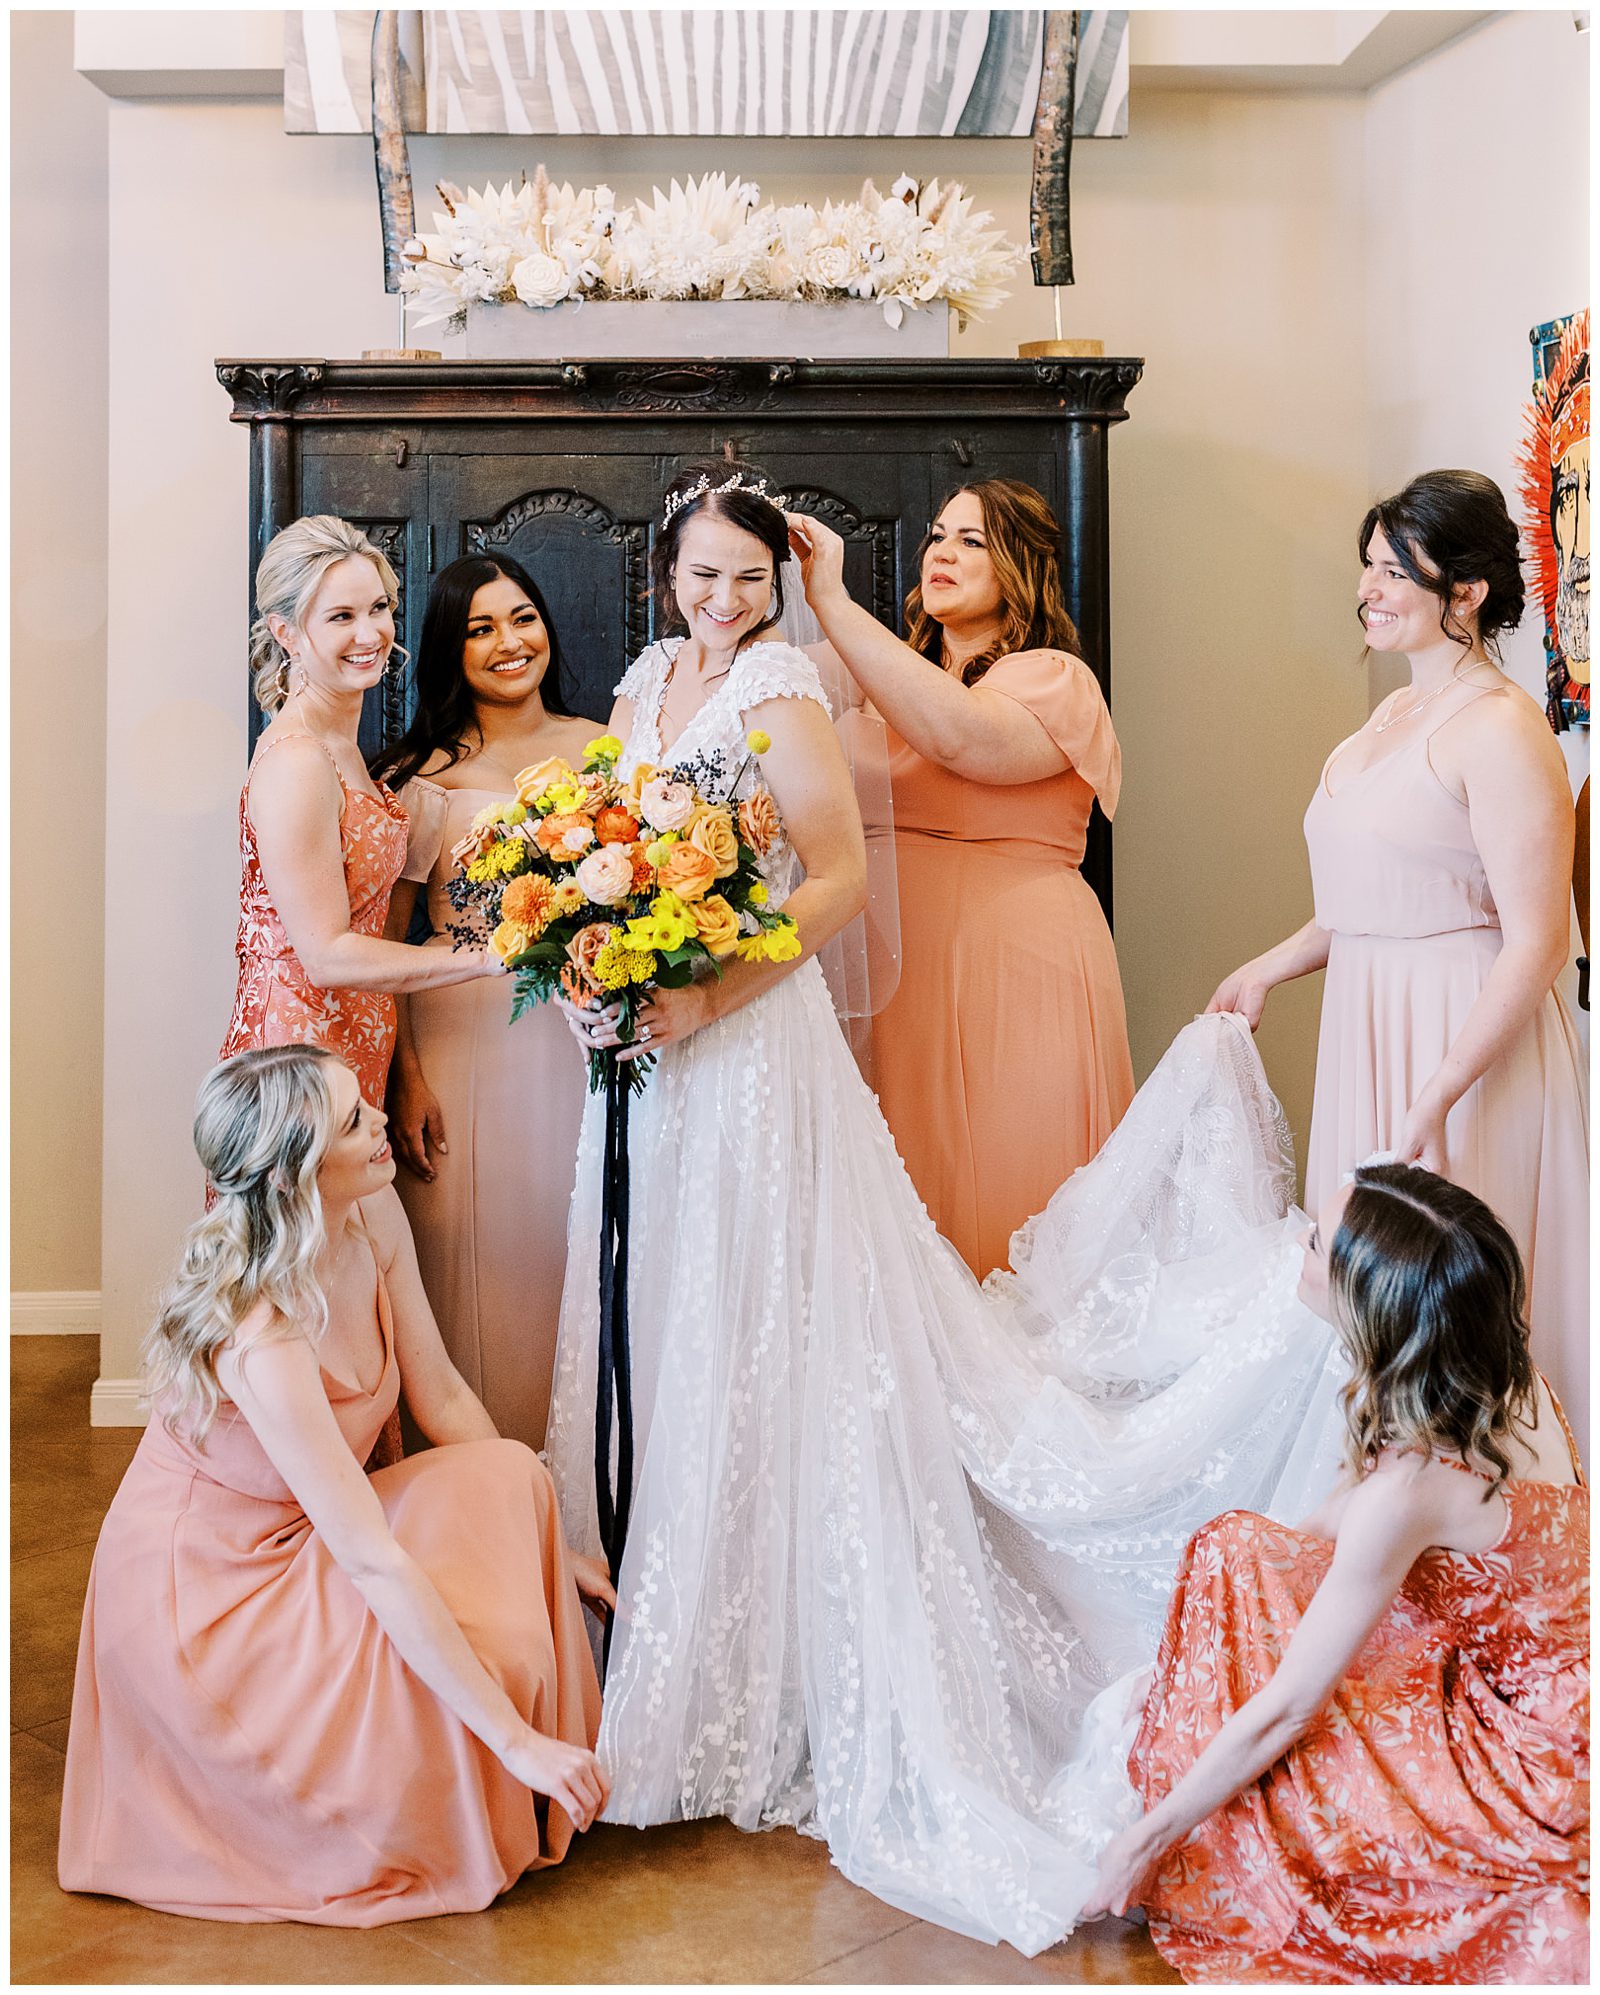 Bride and bridesmaids getting ready photos